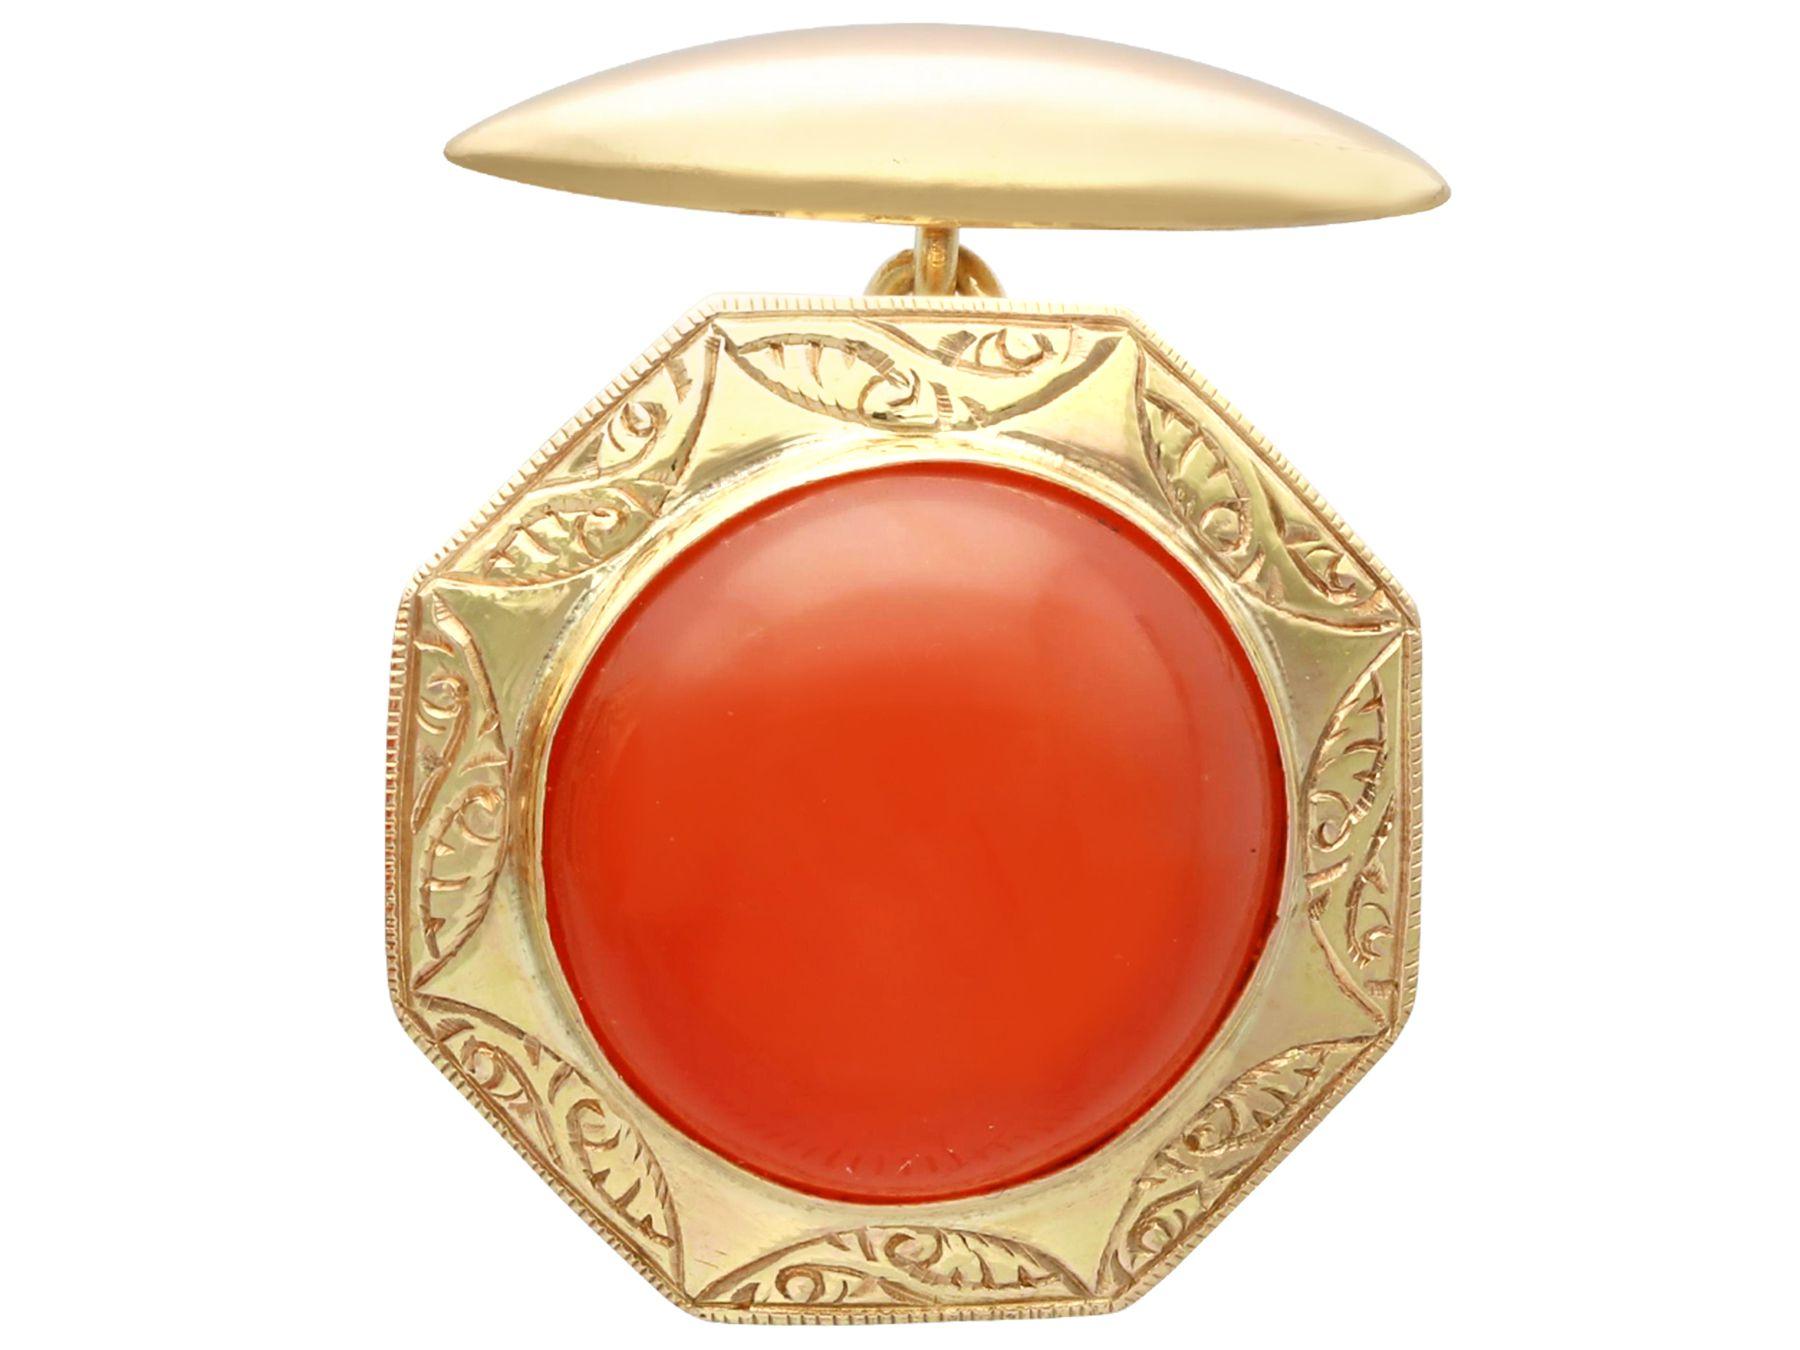 Antique 9.78 Carat Carnelian and Yellow Gold Cufflinks, Circa 1890 In Excellent Condition For Sale In Jesmond, Newcastle Upon Tyne